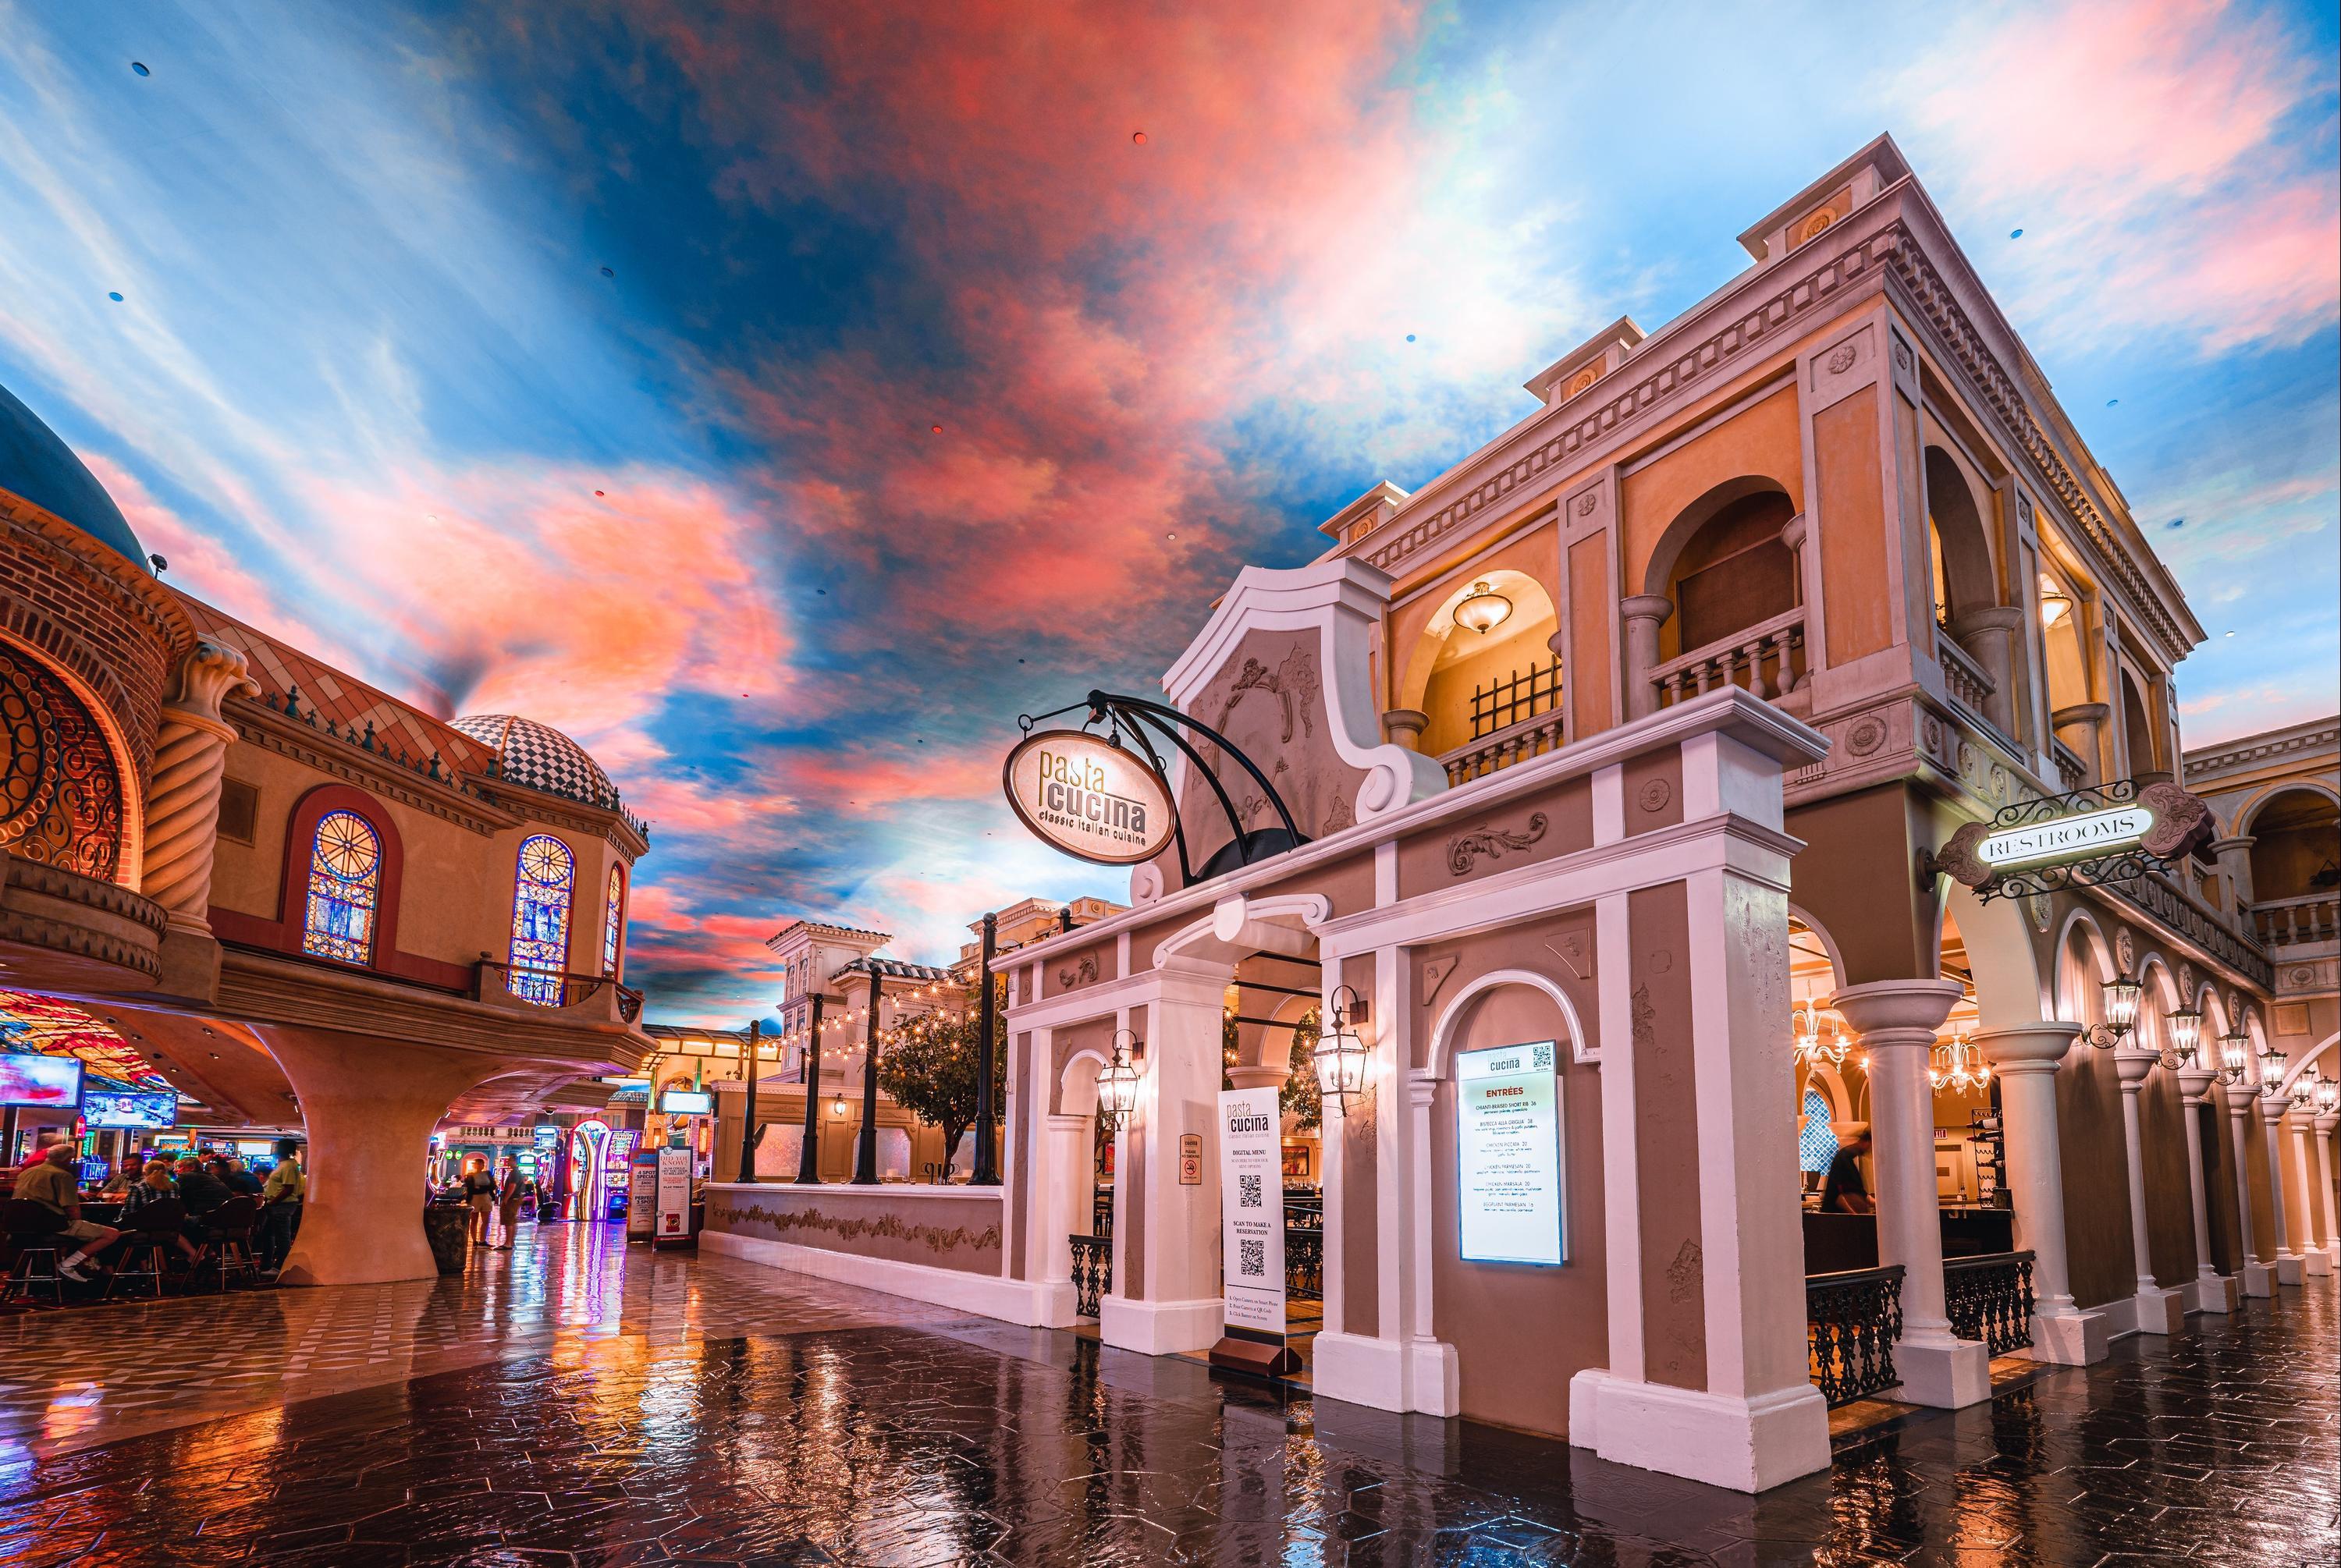 Galleria at Sunset is one of the best places to shop in Las Vegas